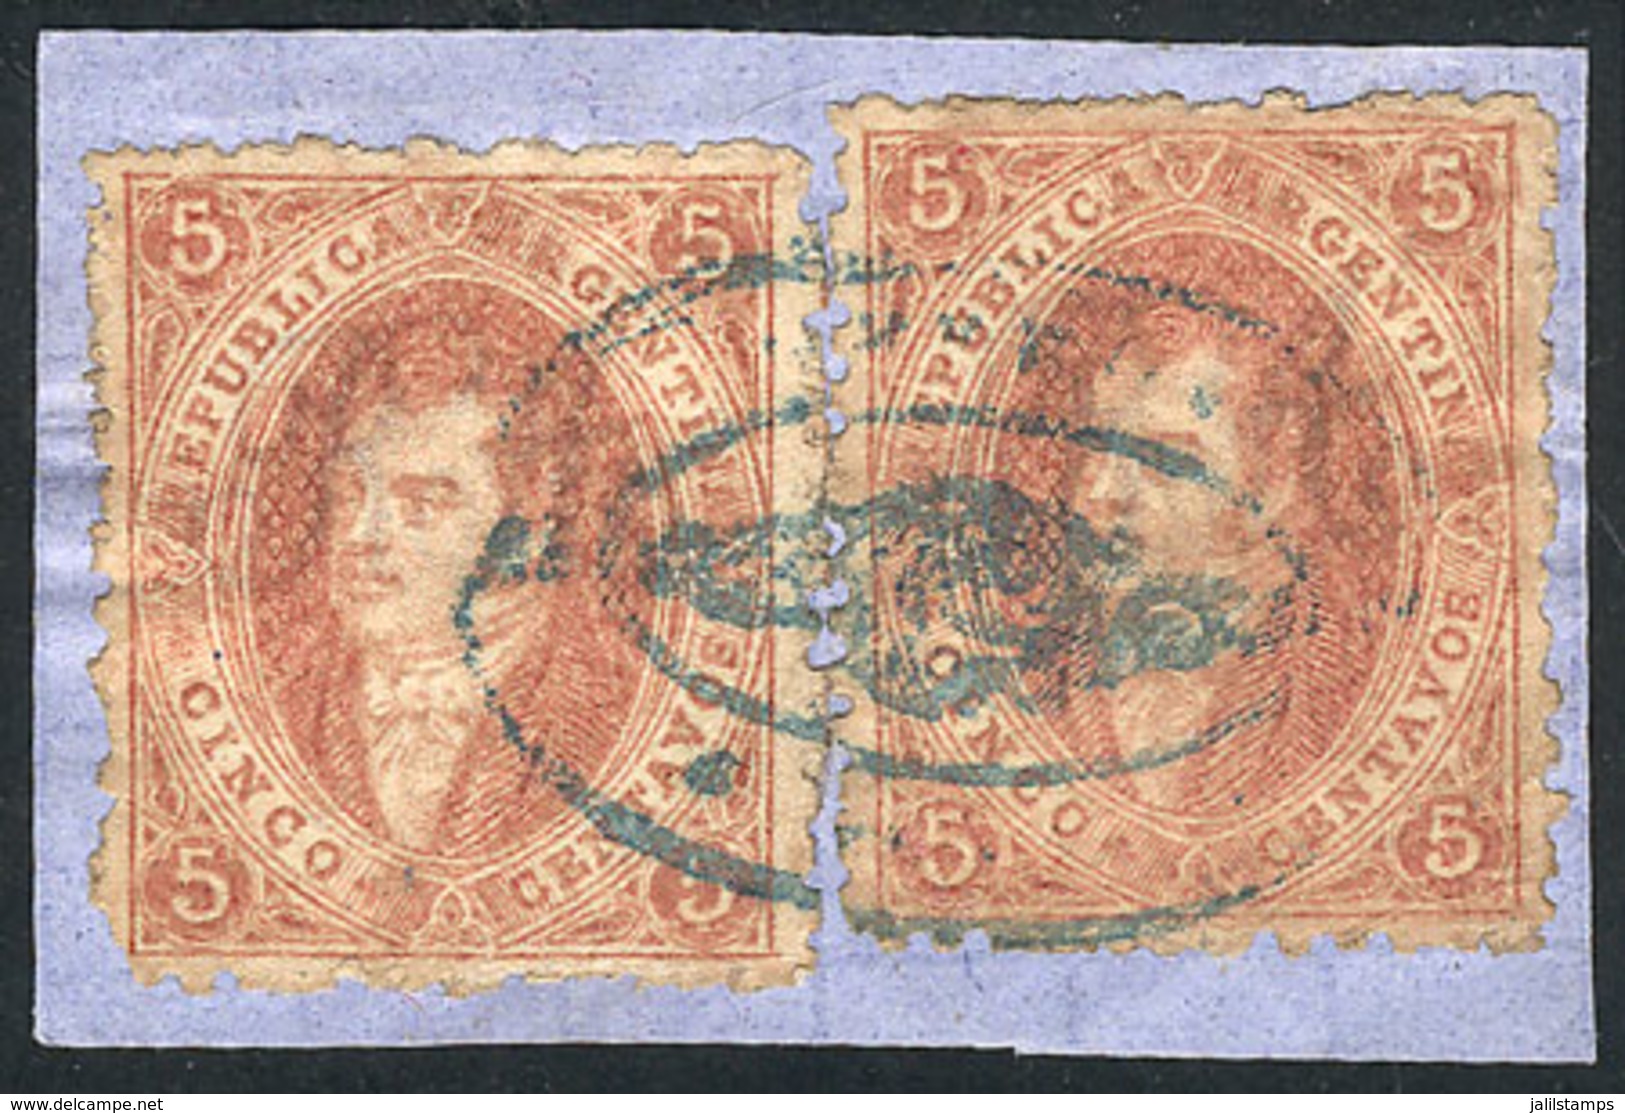 ARGENTINA: GJ.20, Fragment With 2 Examples From 3rd Printing With Blue Rococo Cancel To Be Determined, Very Nice, Low St - Oblitérés